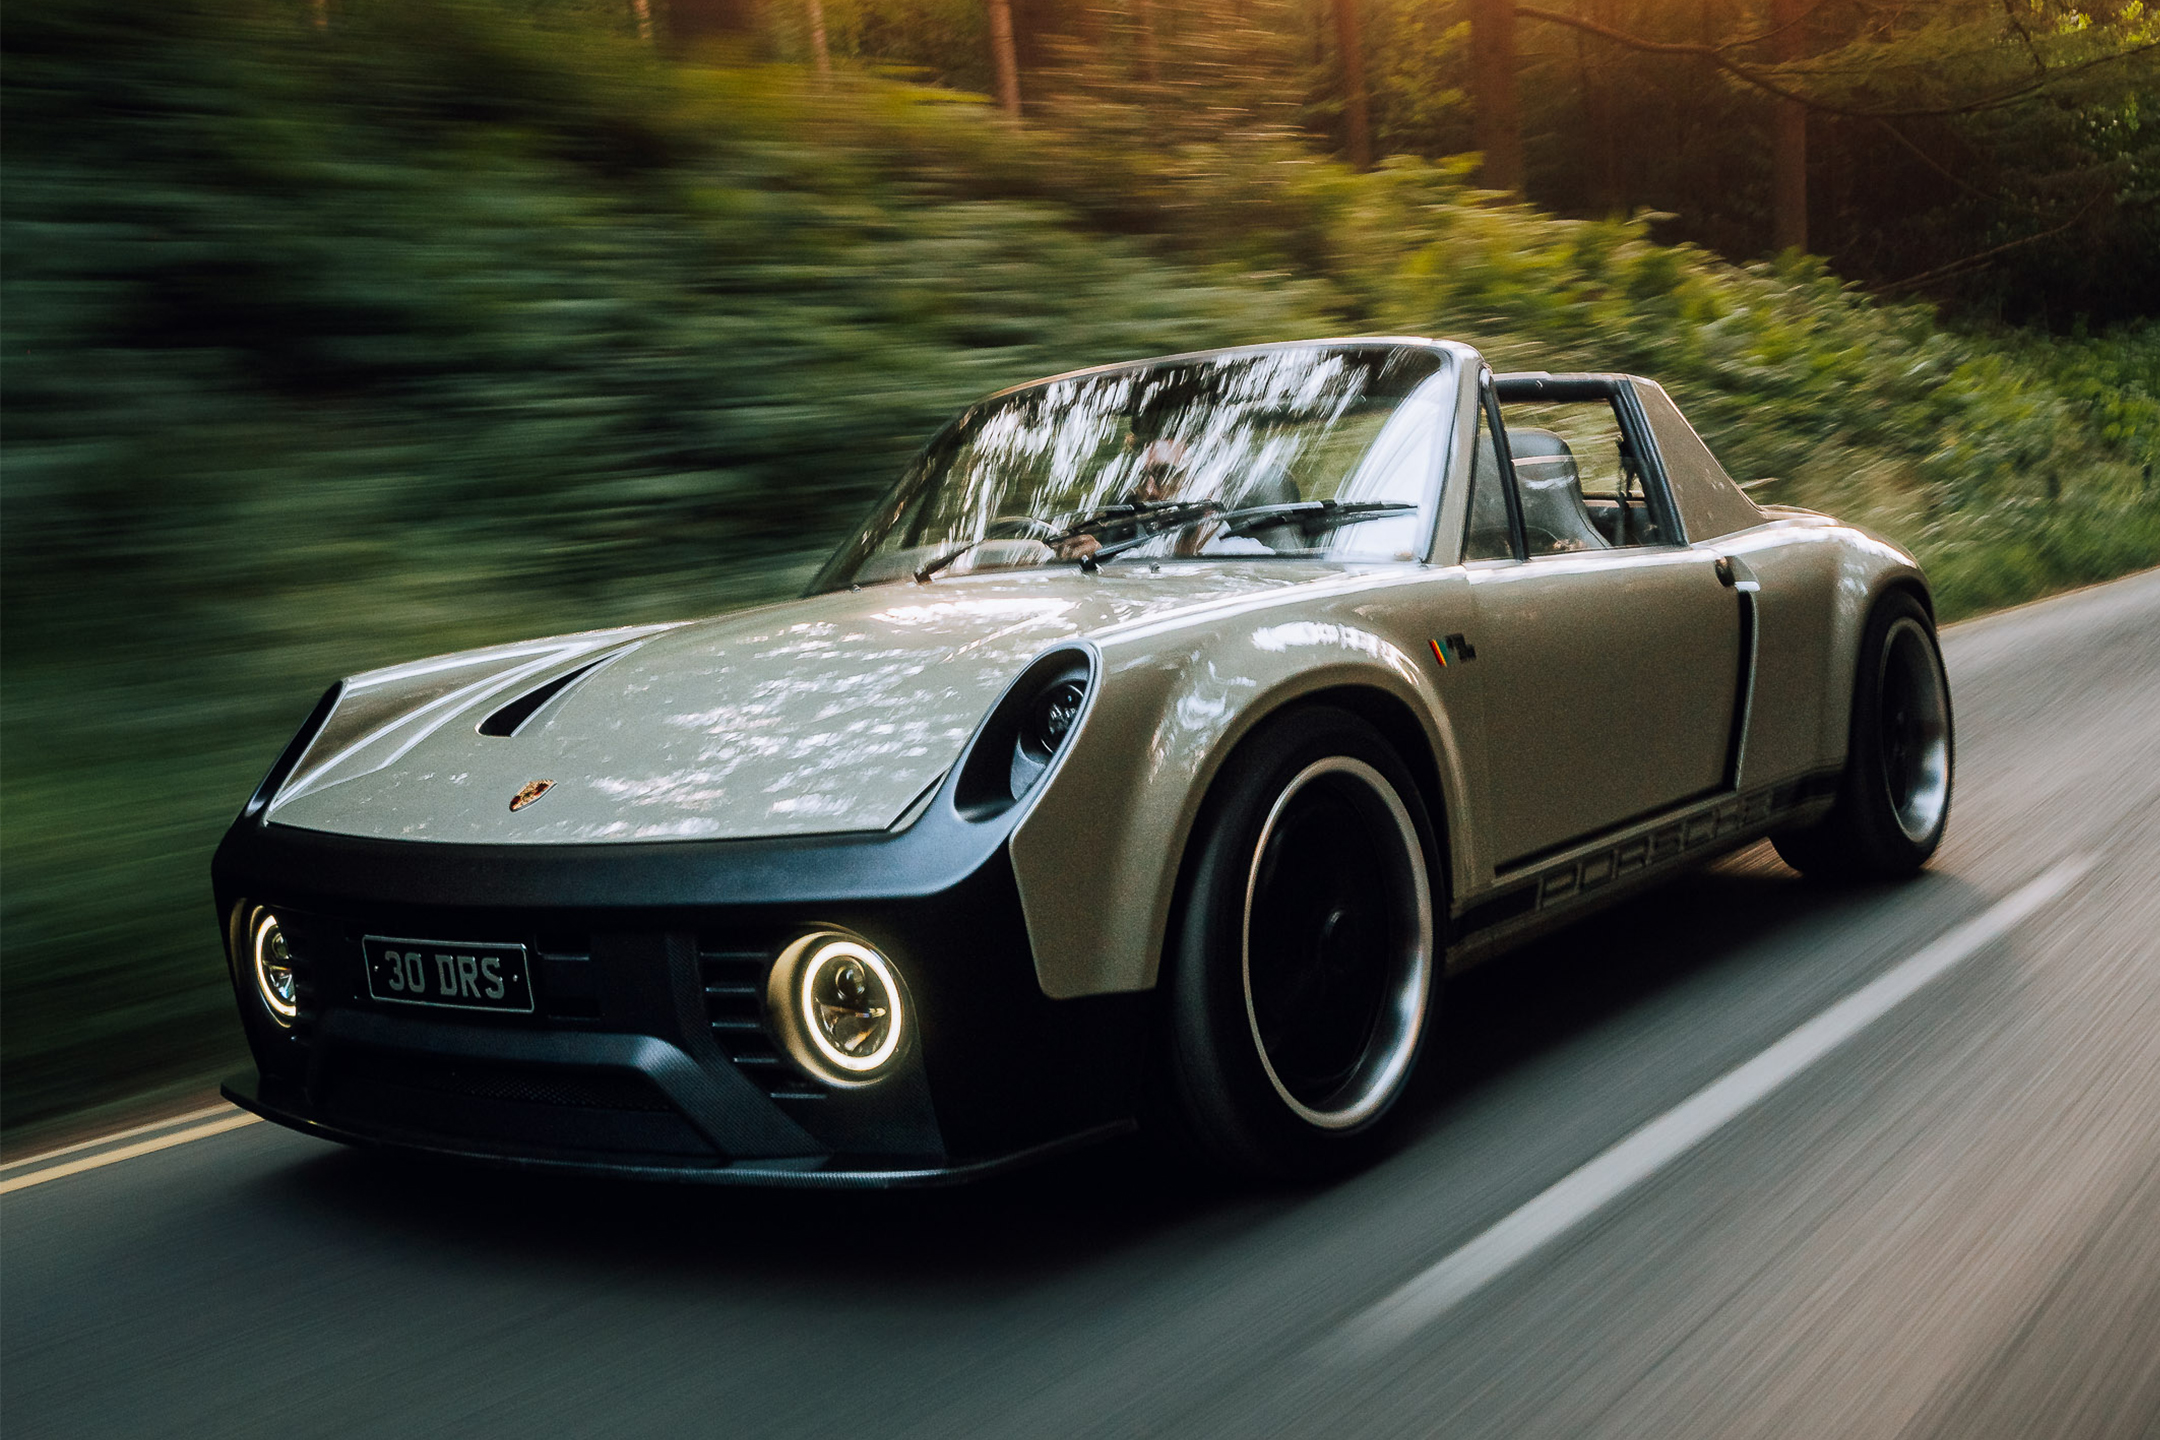 This Porsche 914 restomod comes with a Cayman’s bite